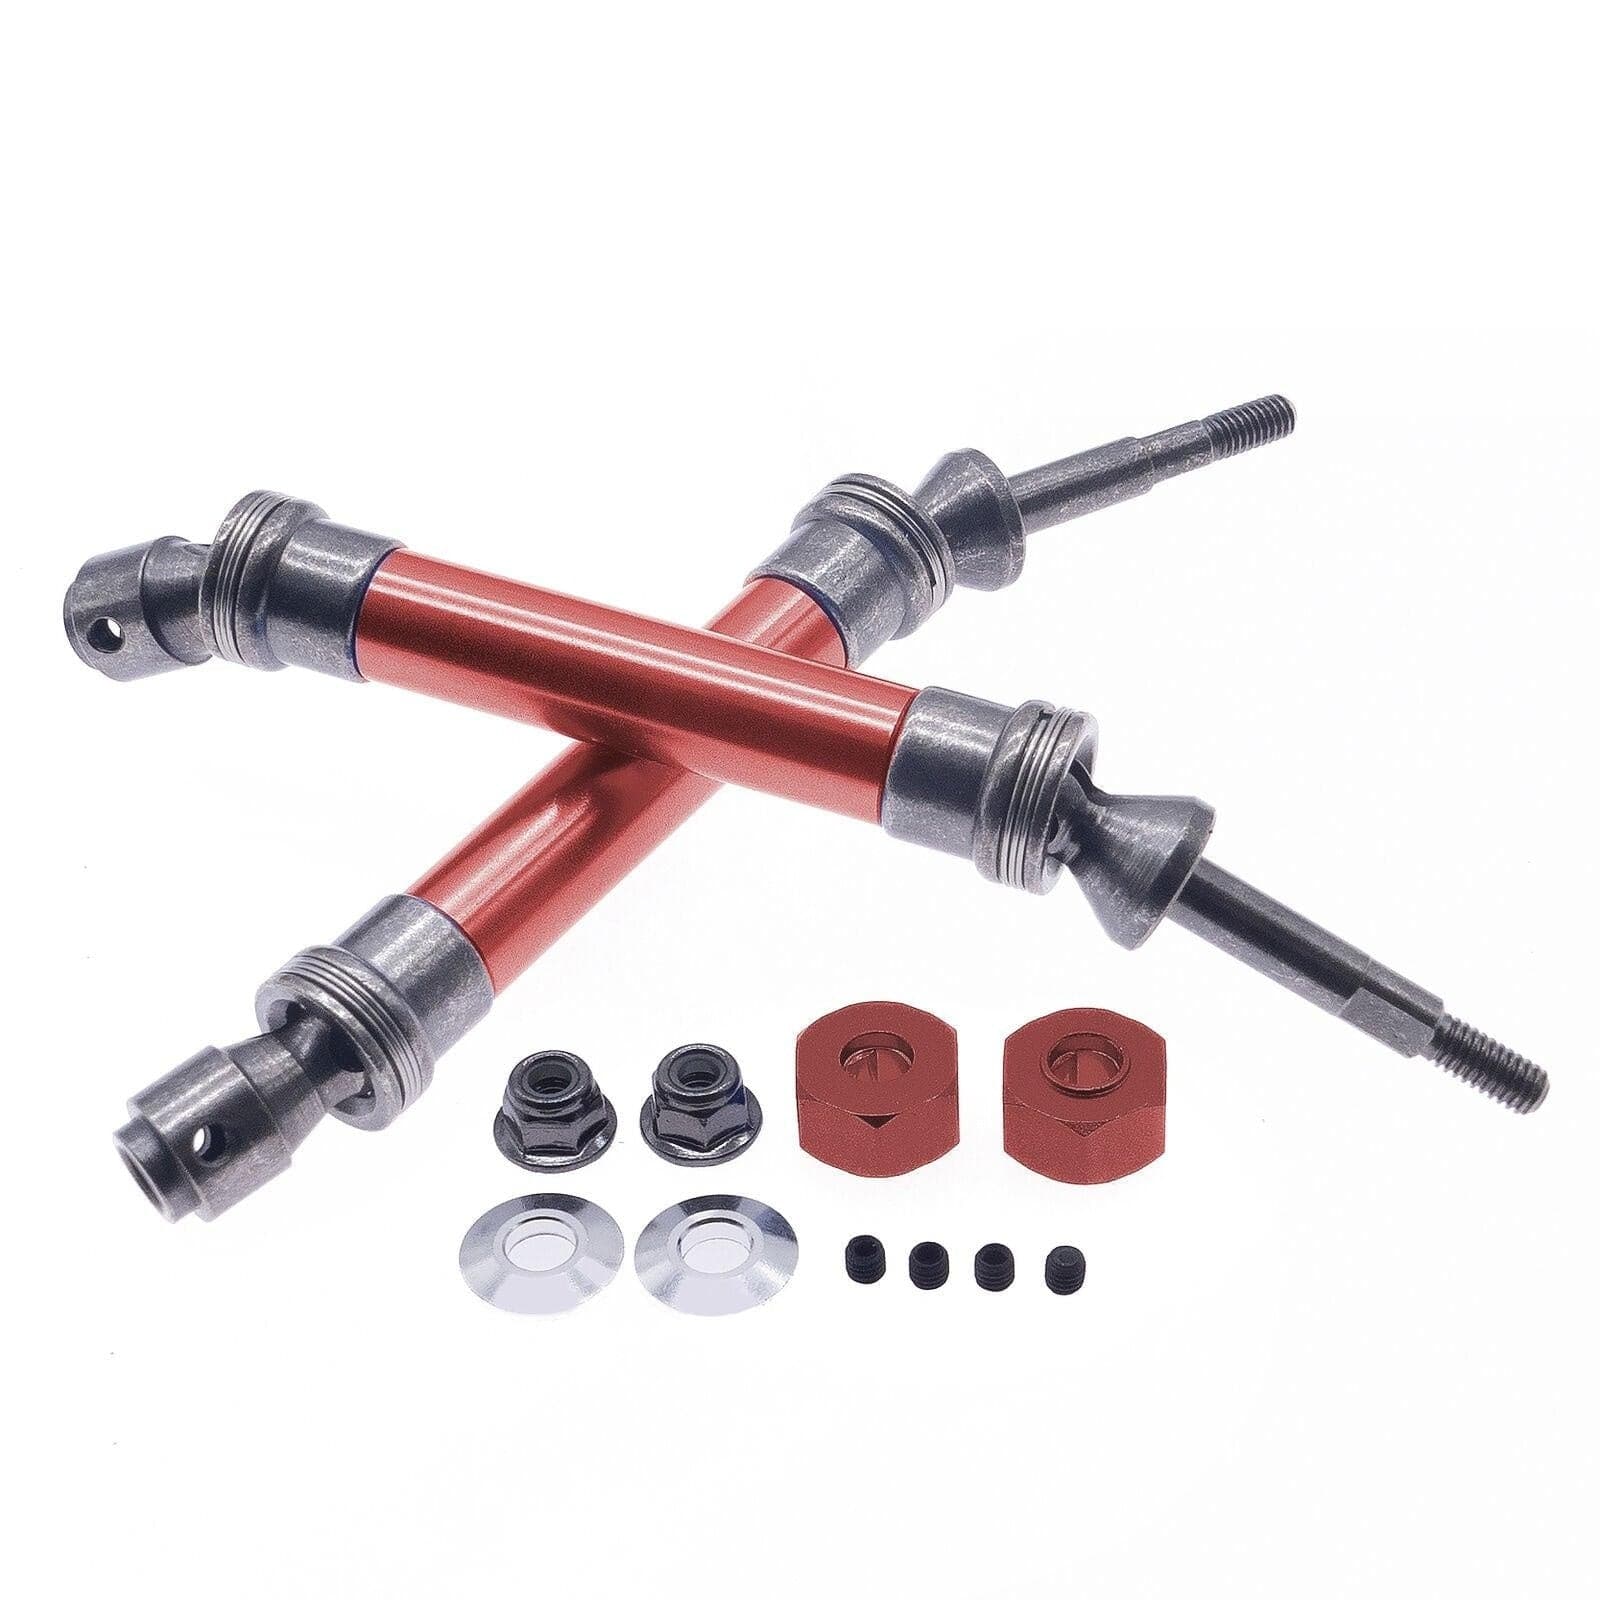 RCAWD ECX UPGRADE PARTS RCAWD rear drive shaft for 1/10 ECX 2WD Series AMP MT AMP DB Torment Ruckus Axe